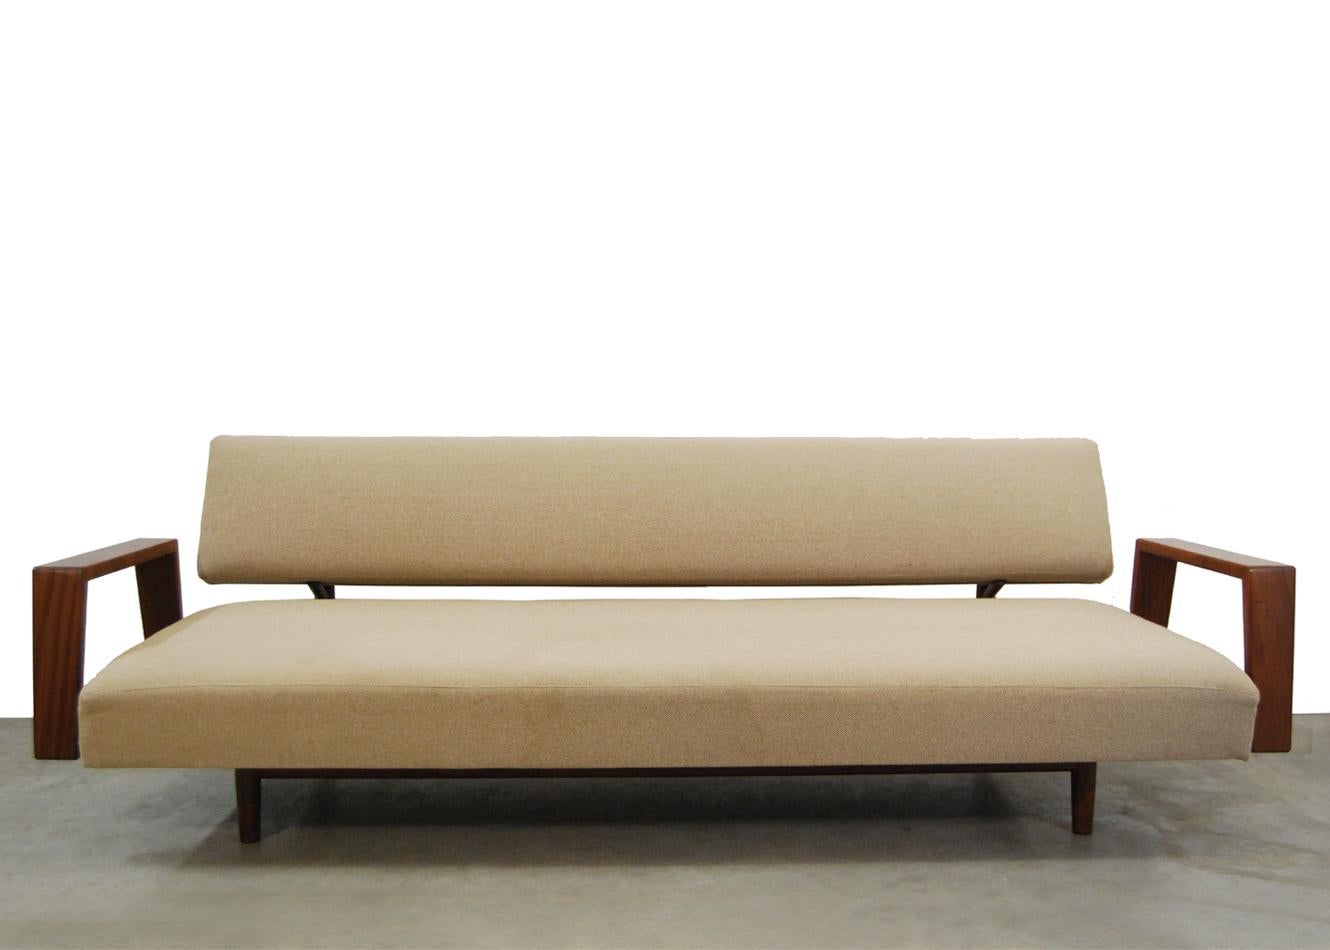 Rare 'Doublet' (daybed) sofa by Rob Parry for Gelderland designed in 1958. Teak frame and light brown fabric in good original condition. The sofa can be transformed into a daybed with a hand movement.
We can re-upholster the sofa if desired in